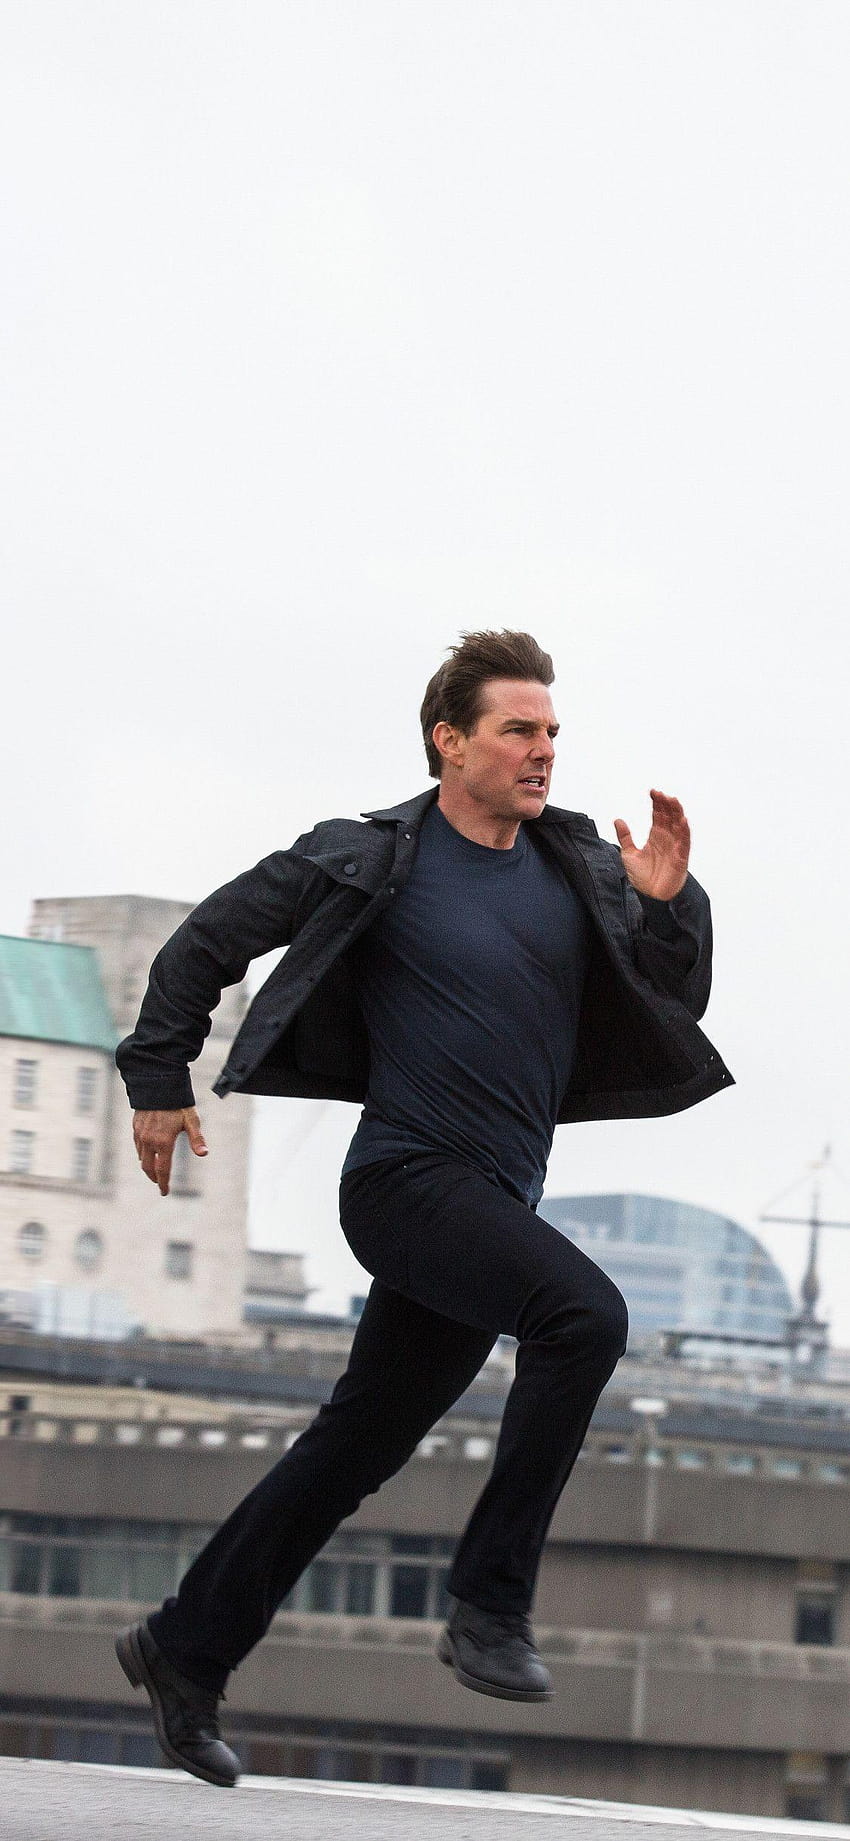 1125x2436 Tom Cruise Running Mission Impossible Fallout Iphone XS, mission impossible iphone HD phone wallpaper